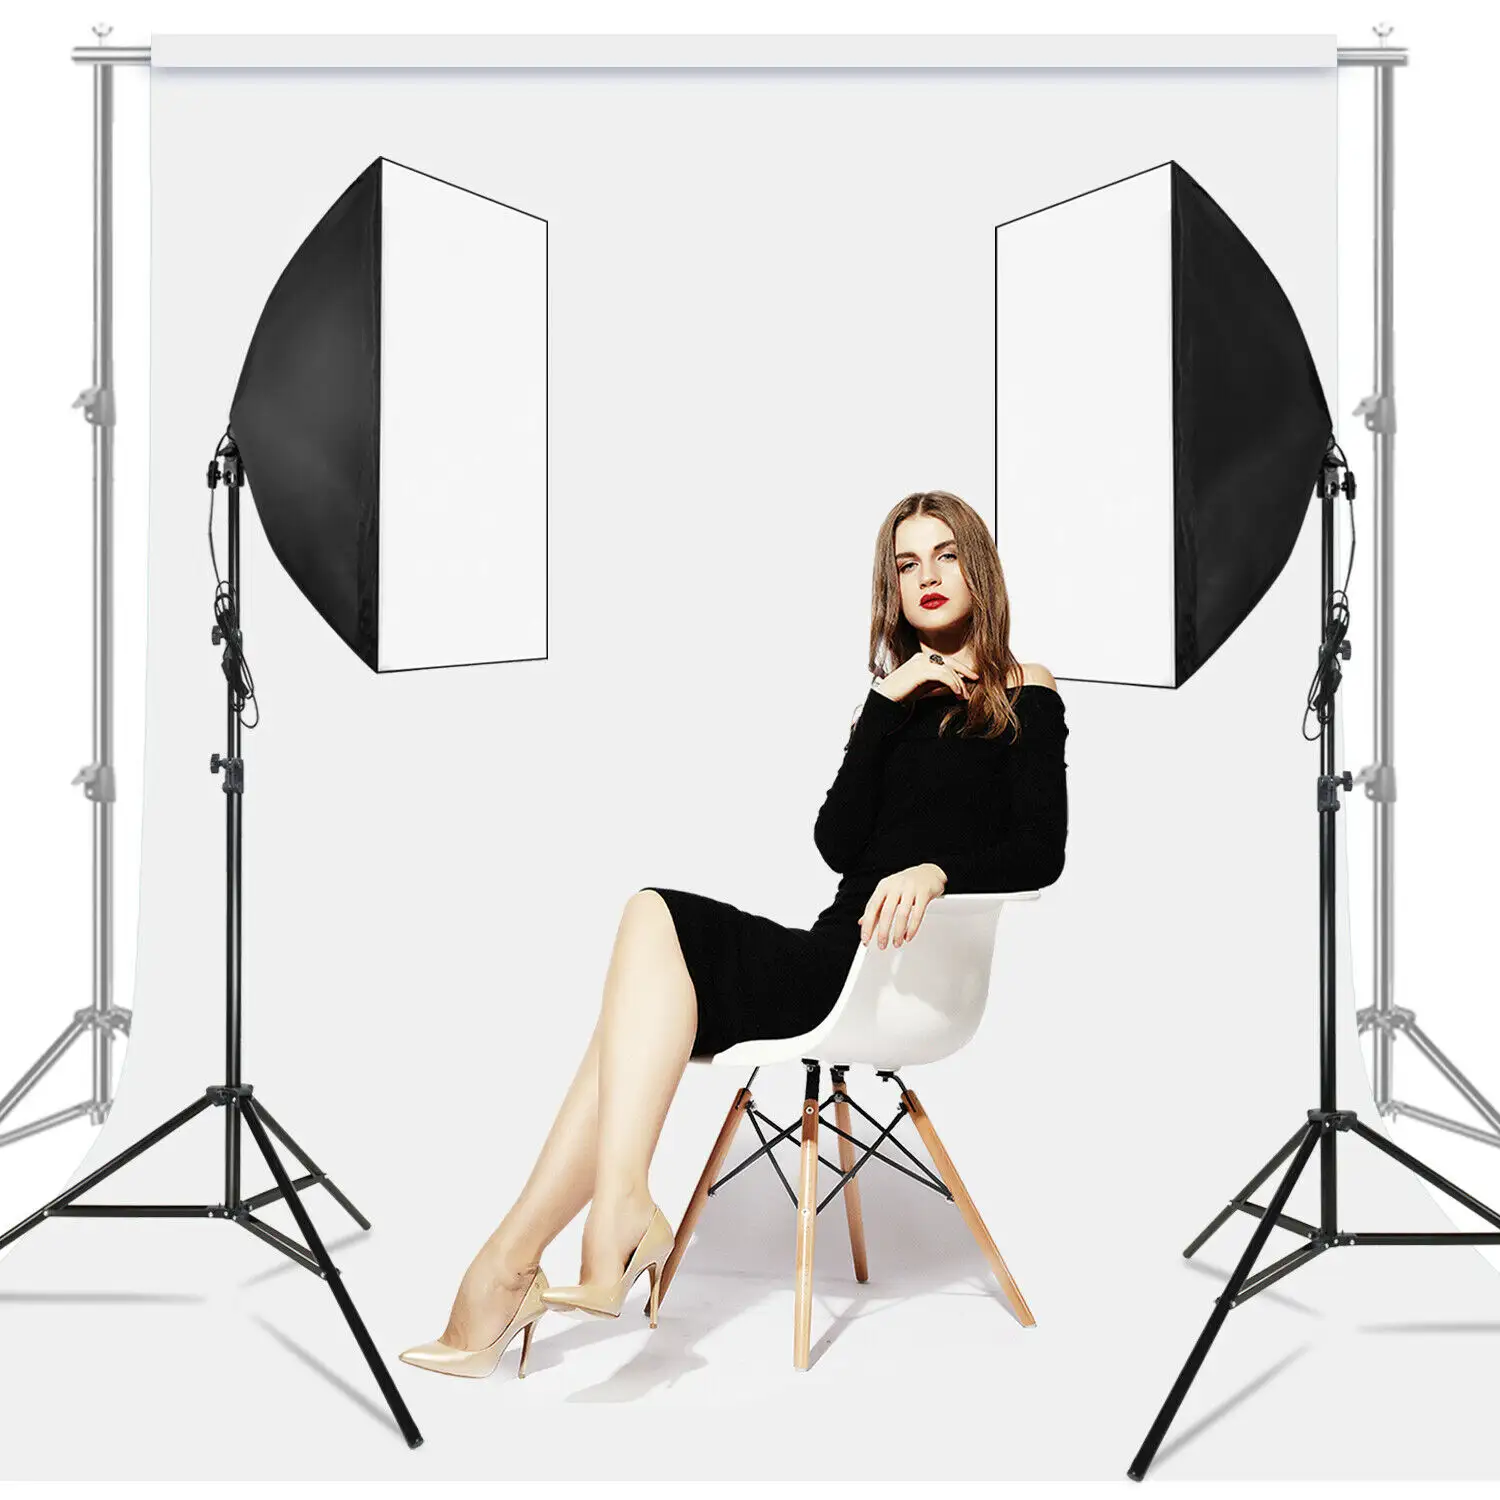 Photo Studio Softbox 20" X 28" 4 Lamp Terminal Photography With Camera Accessories For Professional Photo Studio Video